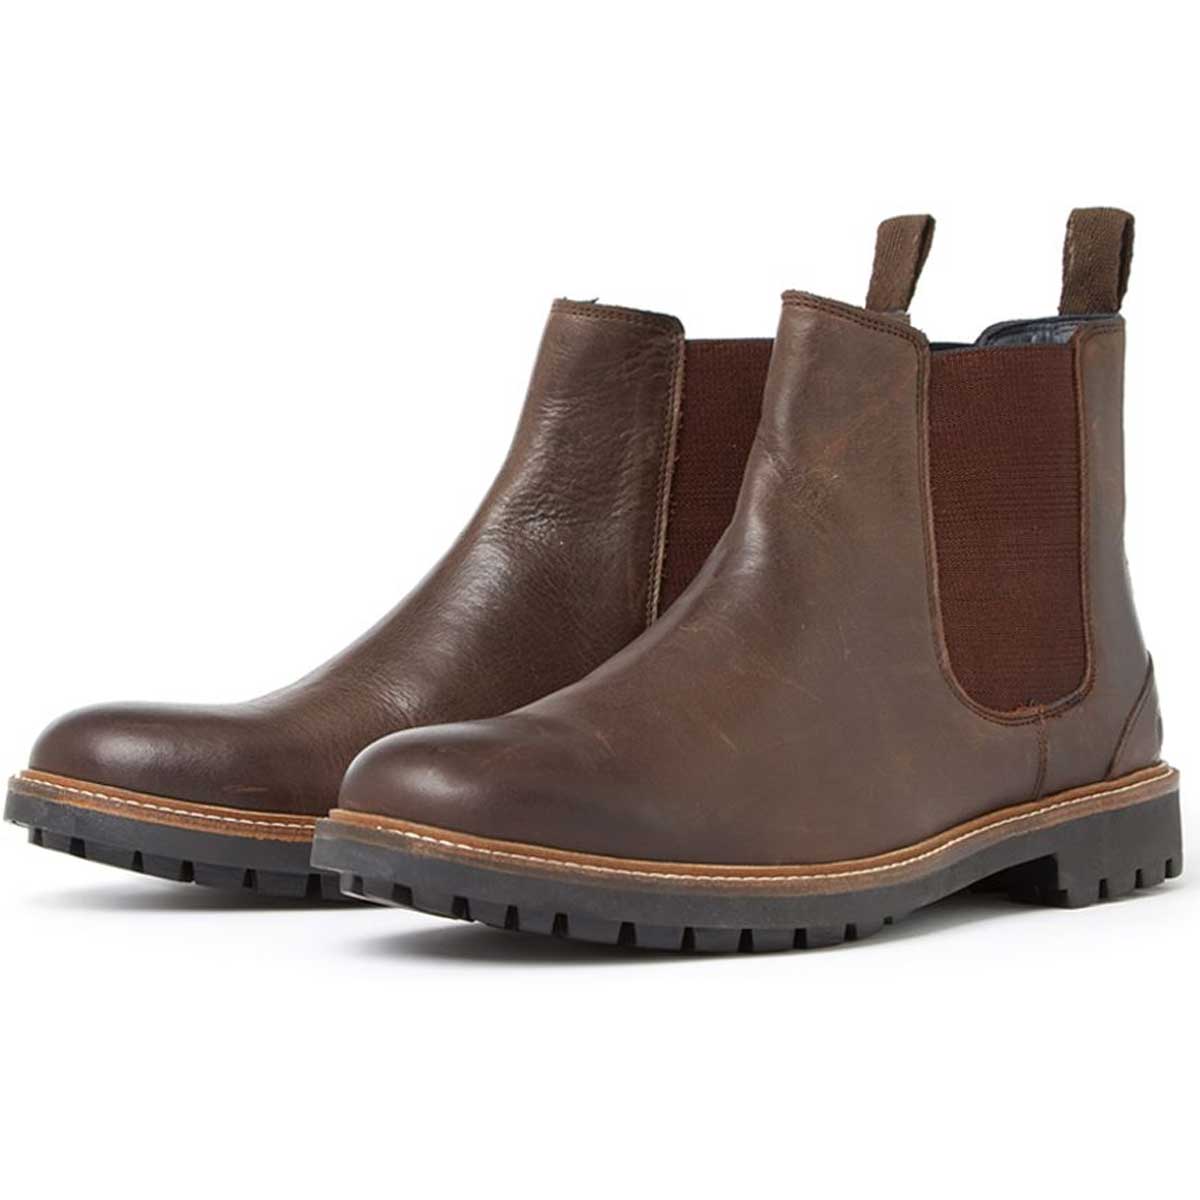 CHATHAM Mens Chirk Leather Chelsea Boots - Dark Brown